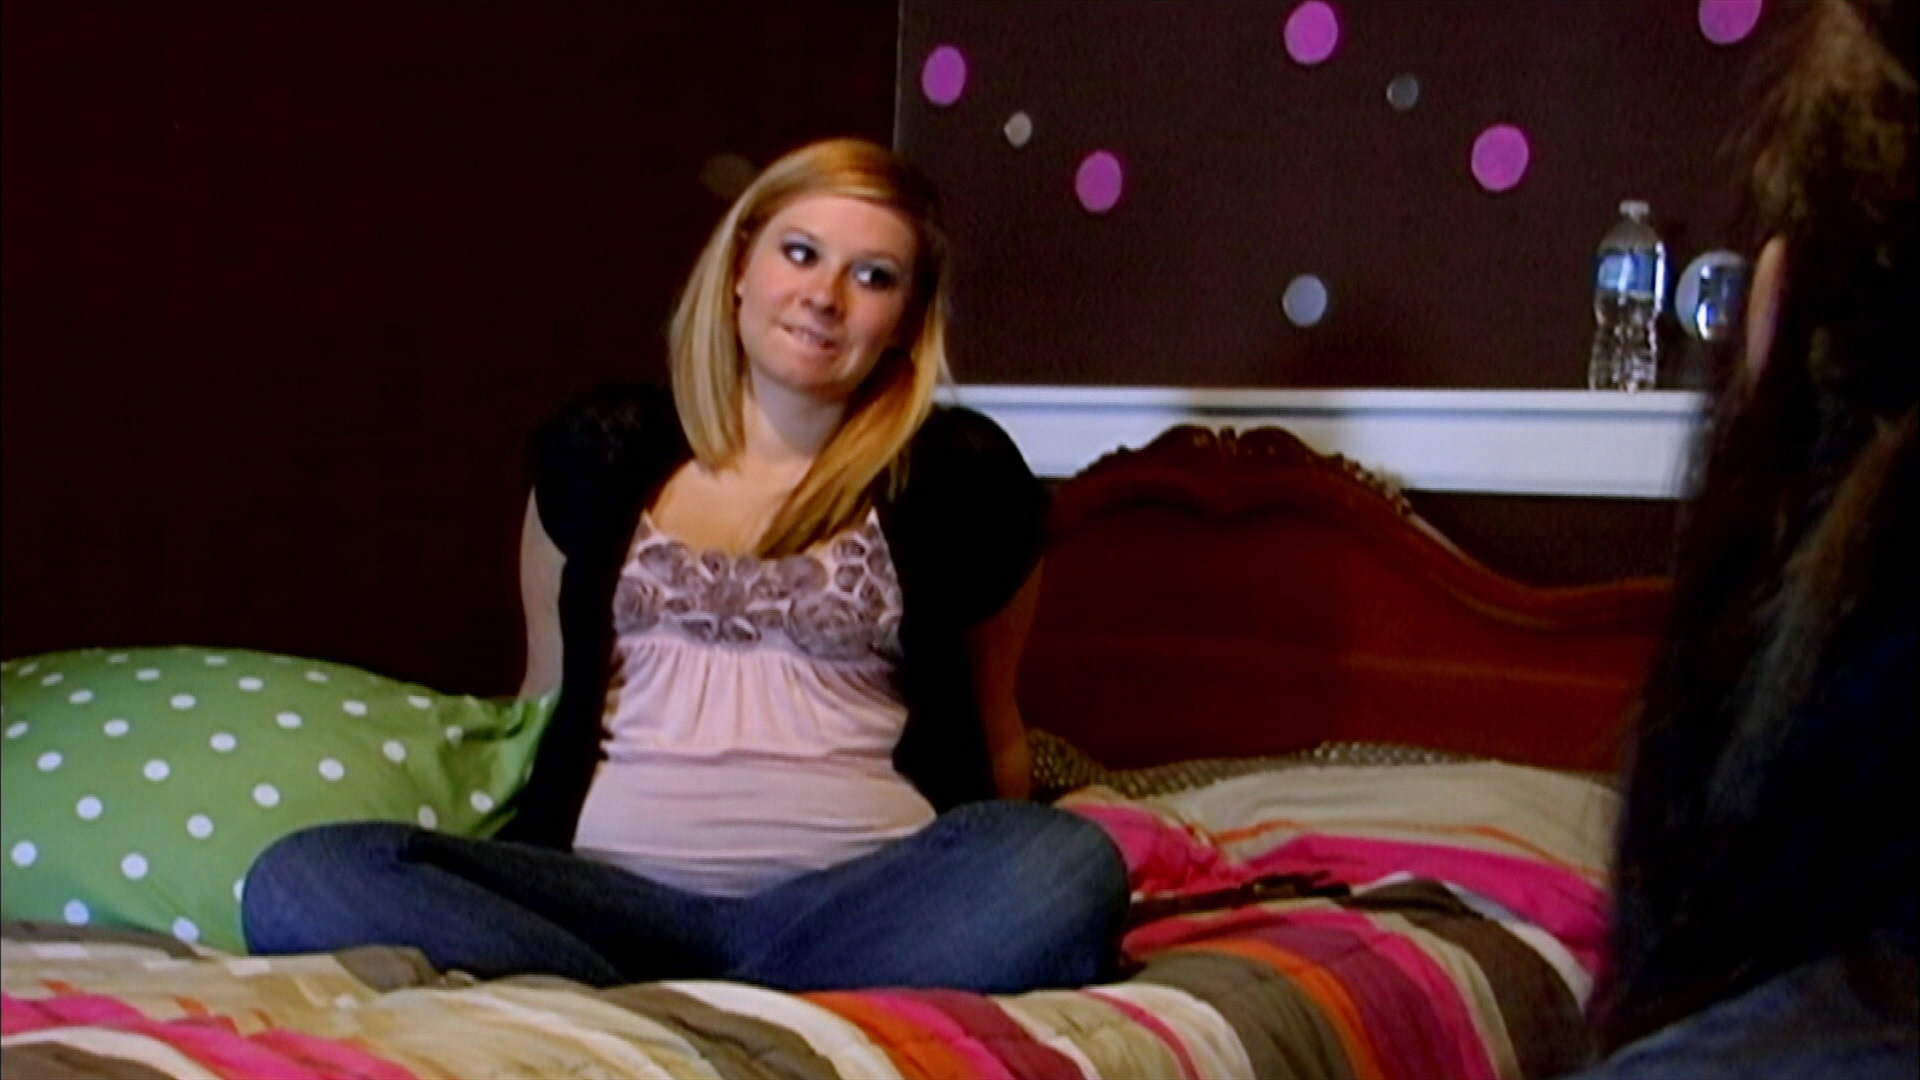 Watch 16 And Pregnant Season 4 Episode 9 16 And Pregnant Hope Full Show On Paramount Plus